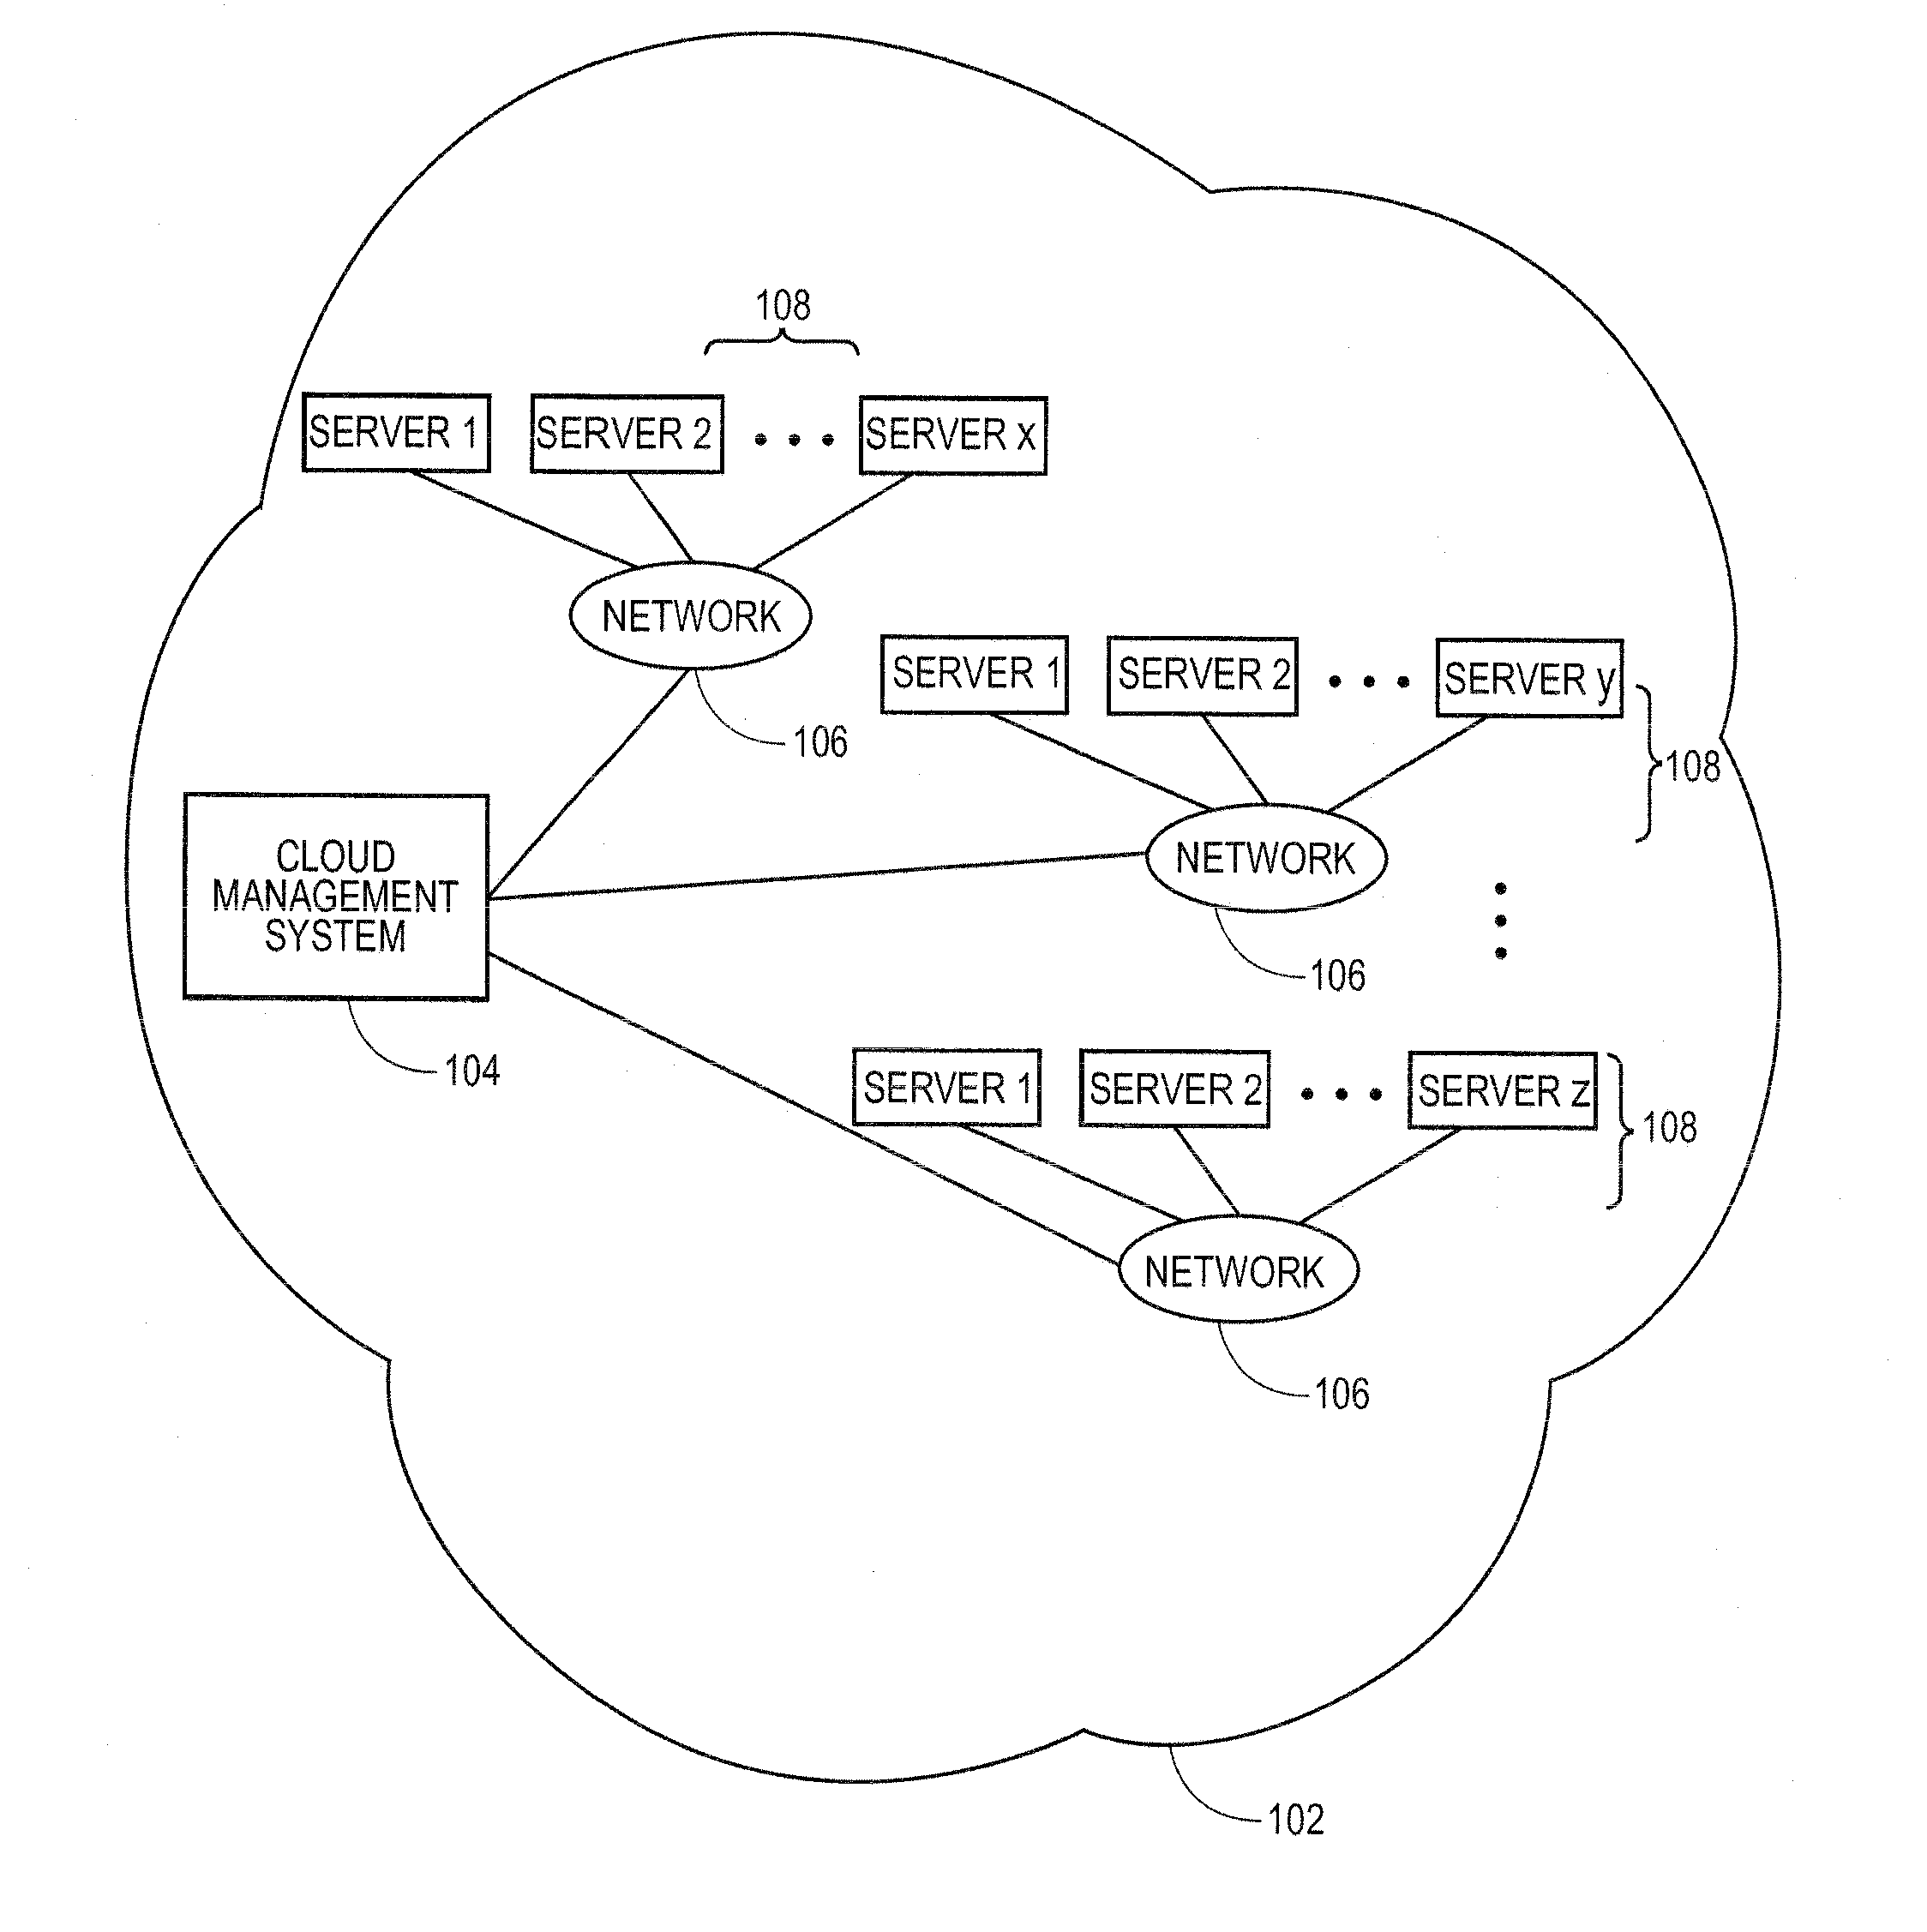 Systems and methods for migrating subscribed services from a set of clouds to a second set of clouds